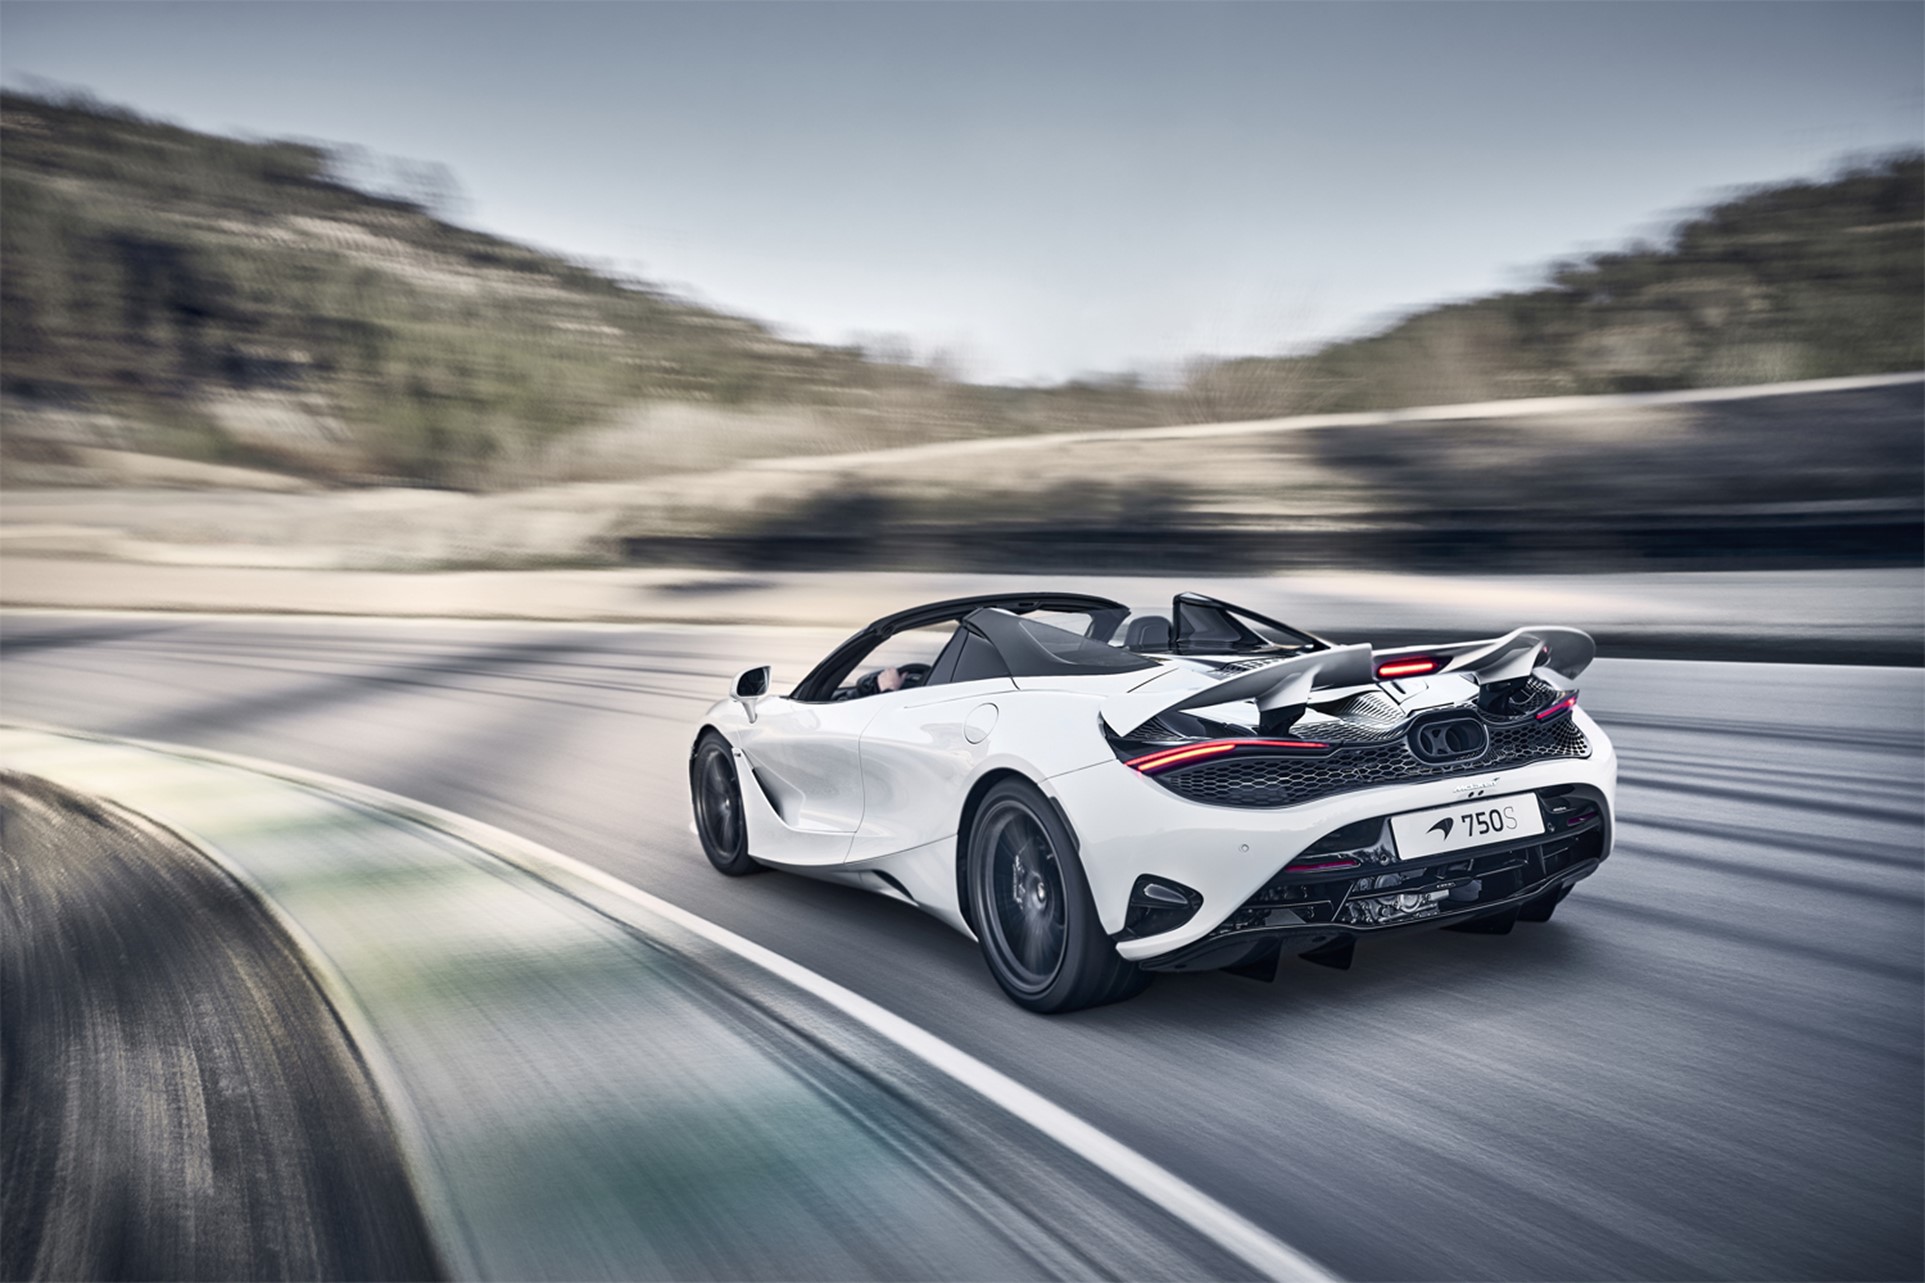 The new McLaren 750S supercar available in coupe and spider body styles provides superior performance, comfort, and agility in a broad range of premium vehicles.